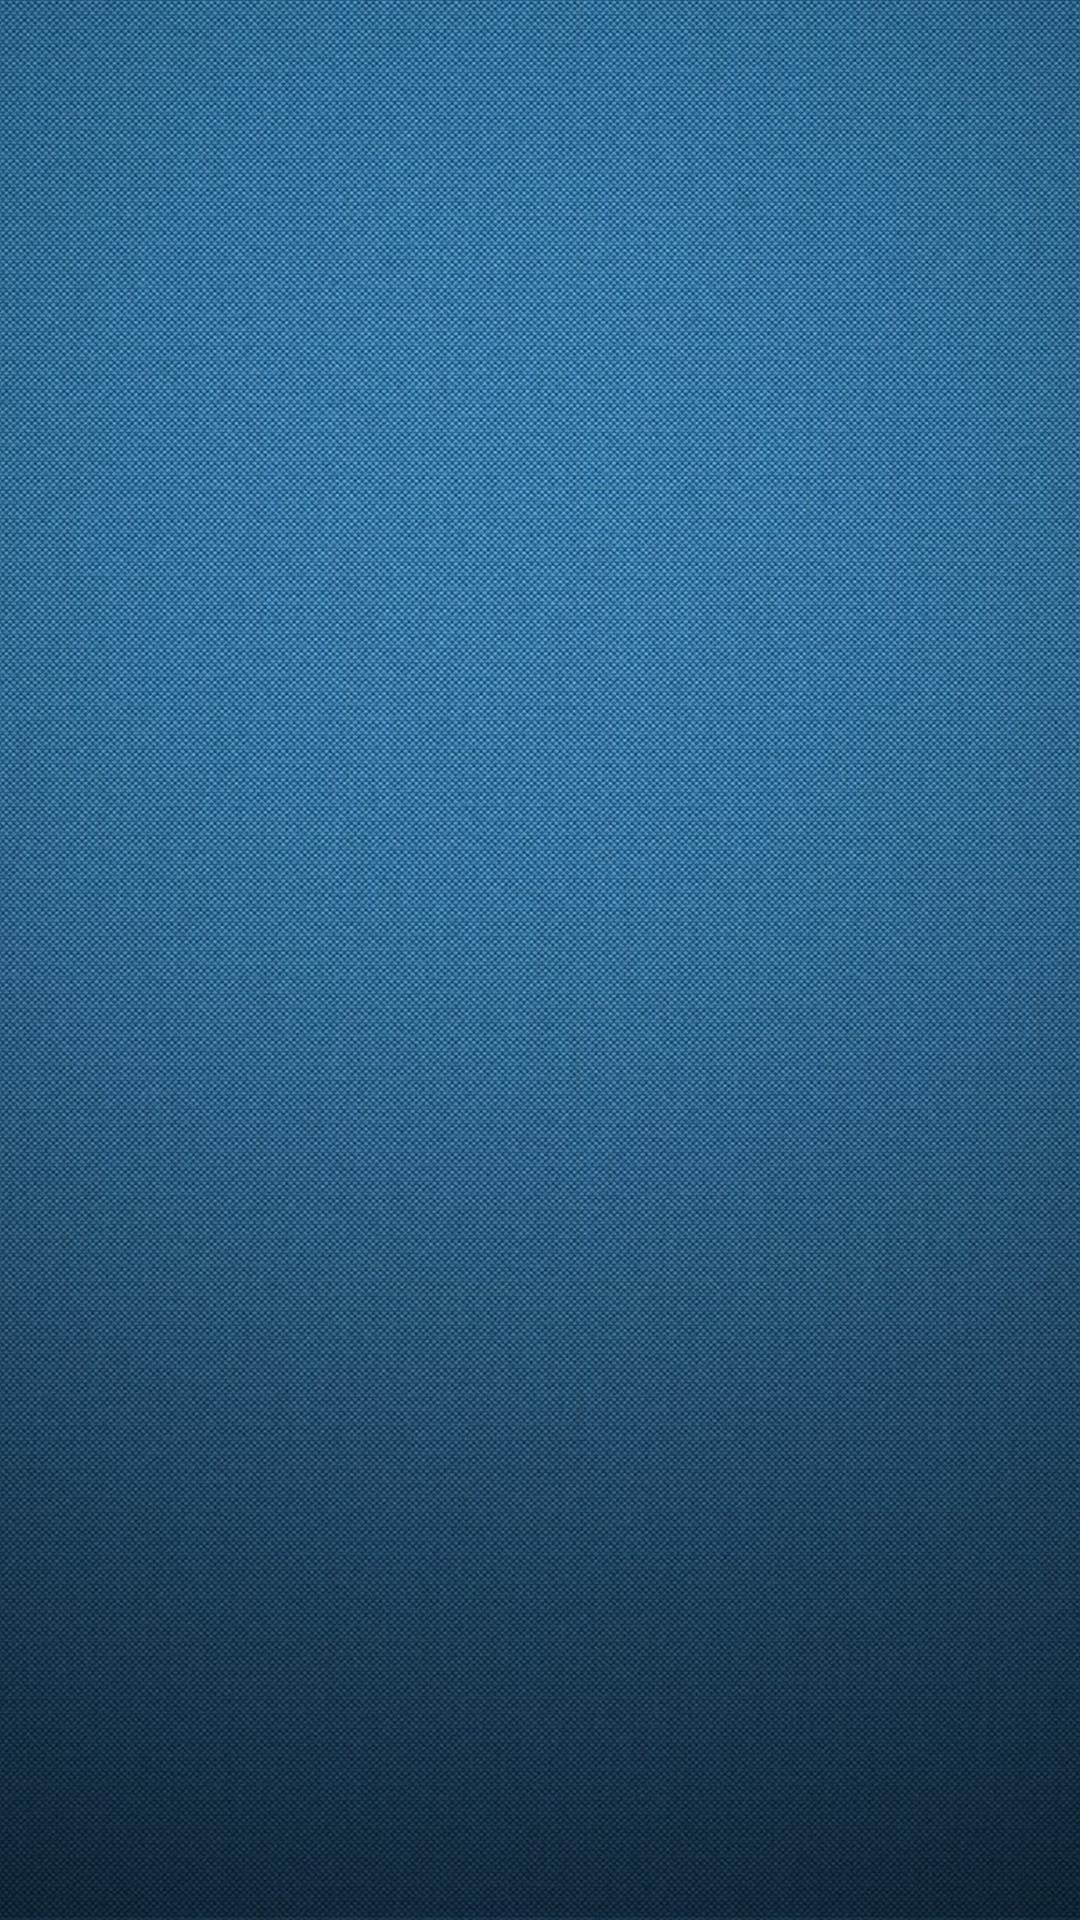 Blue iPhone Wallpaper Solid Color